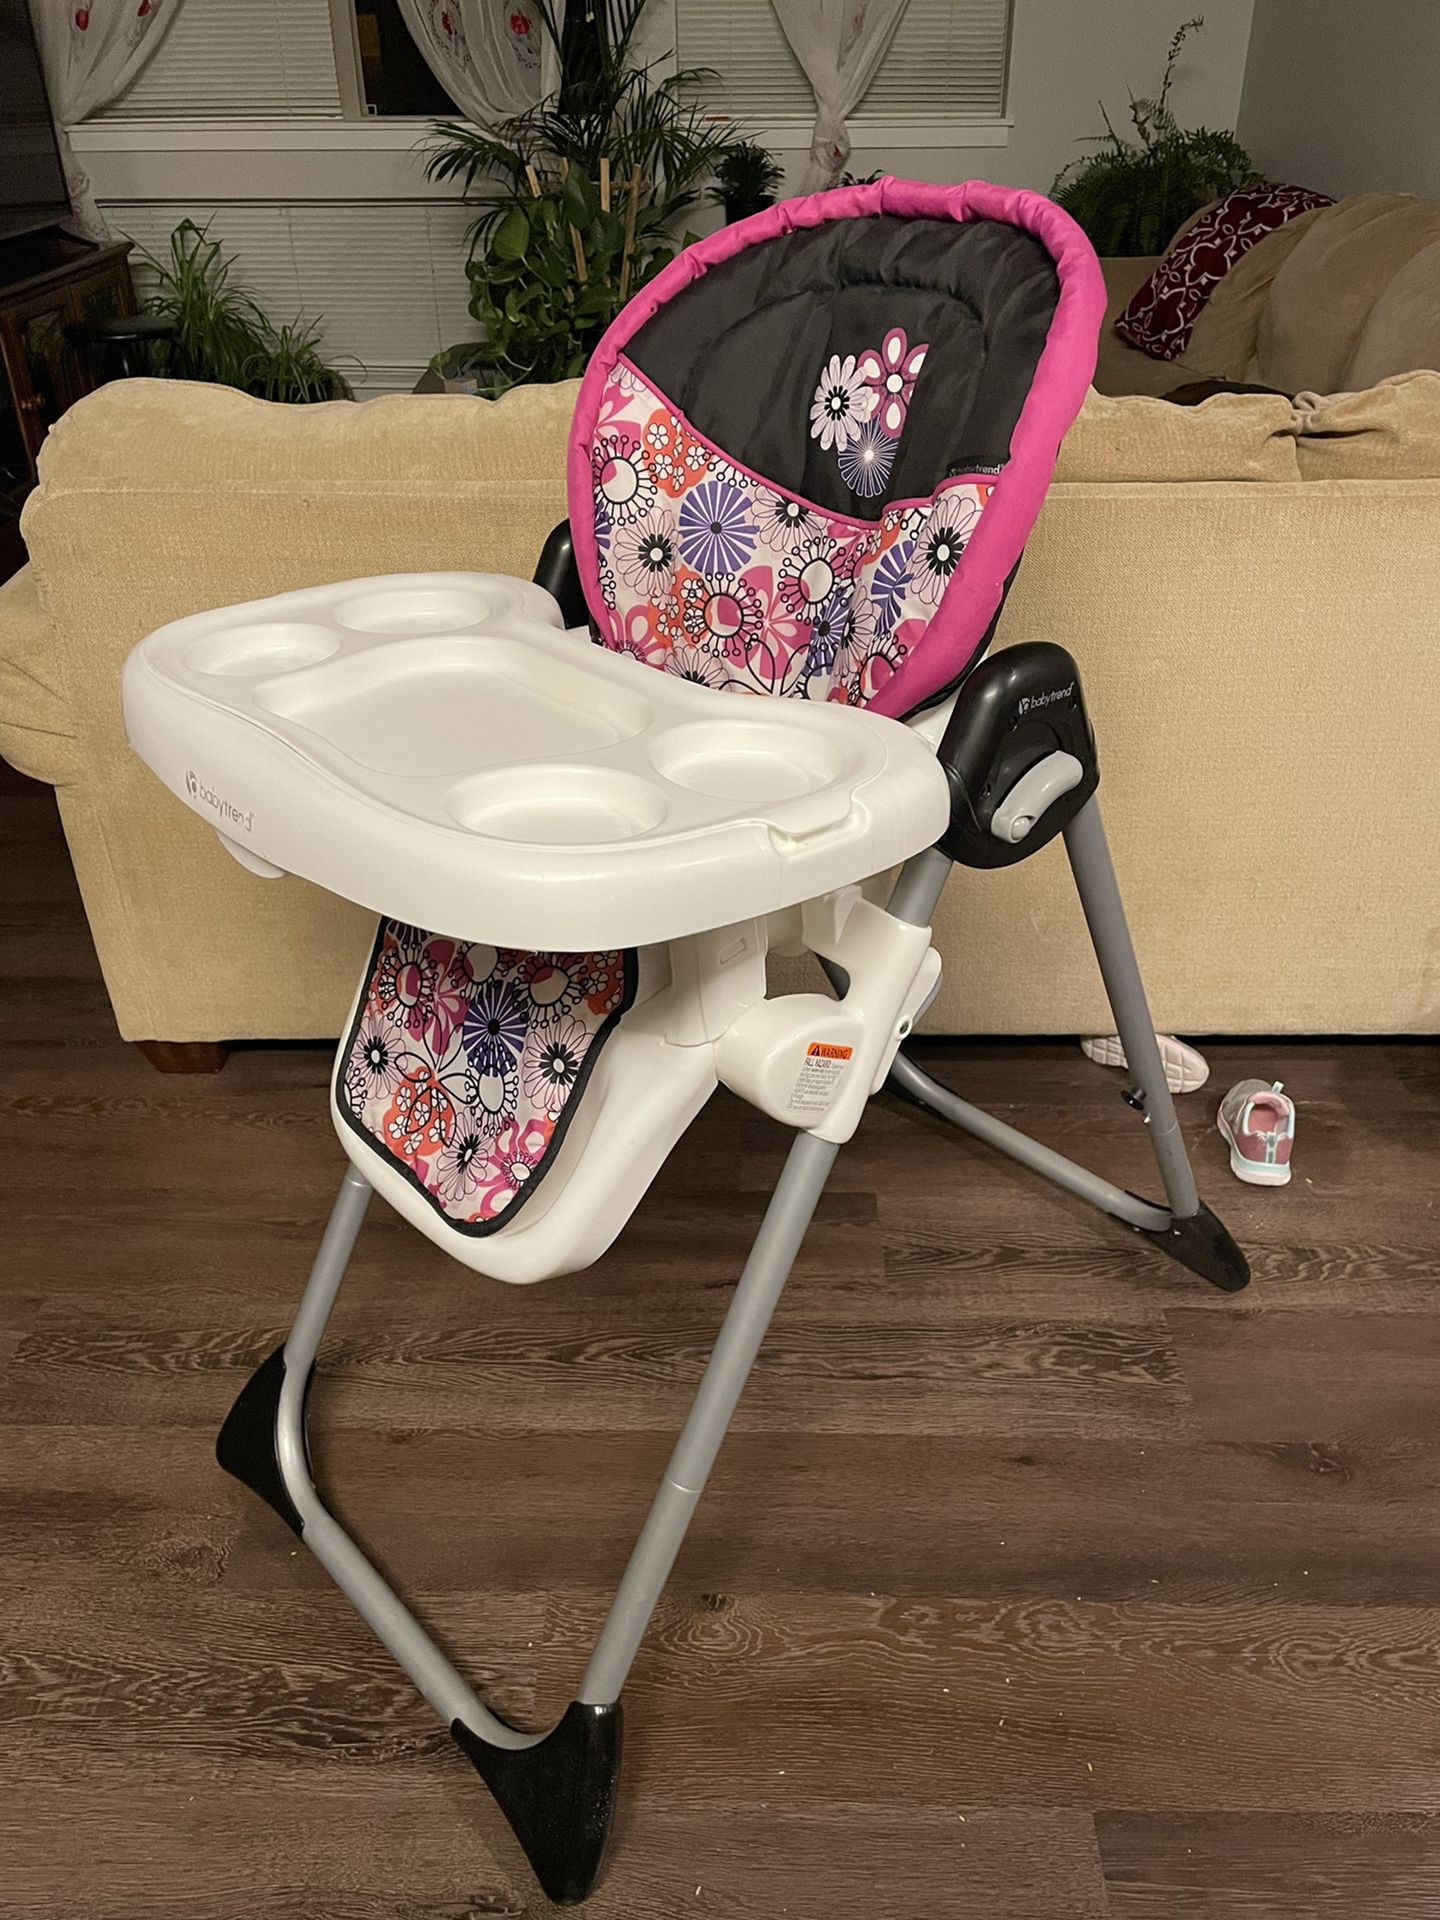 High chair: Baby Trend; pink floral 